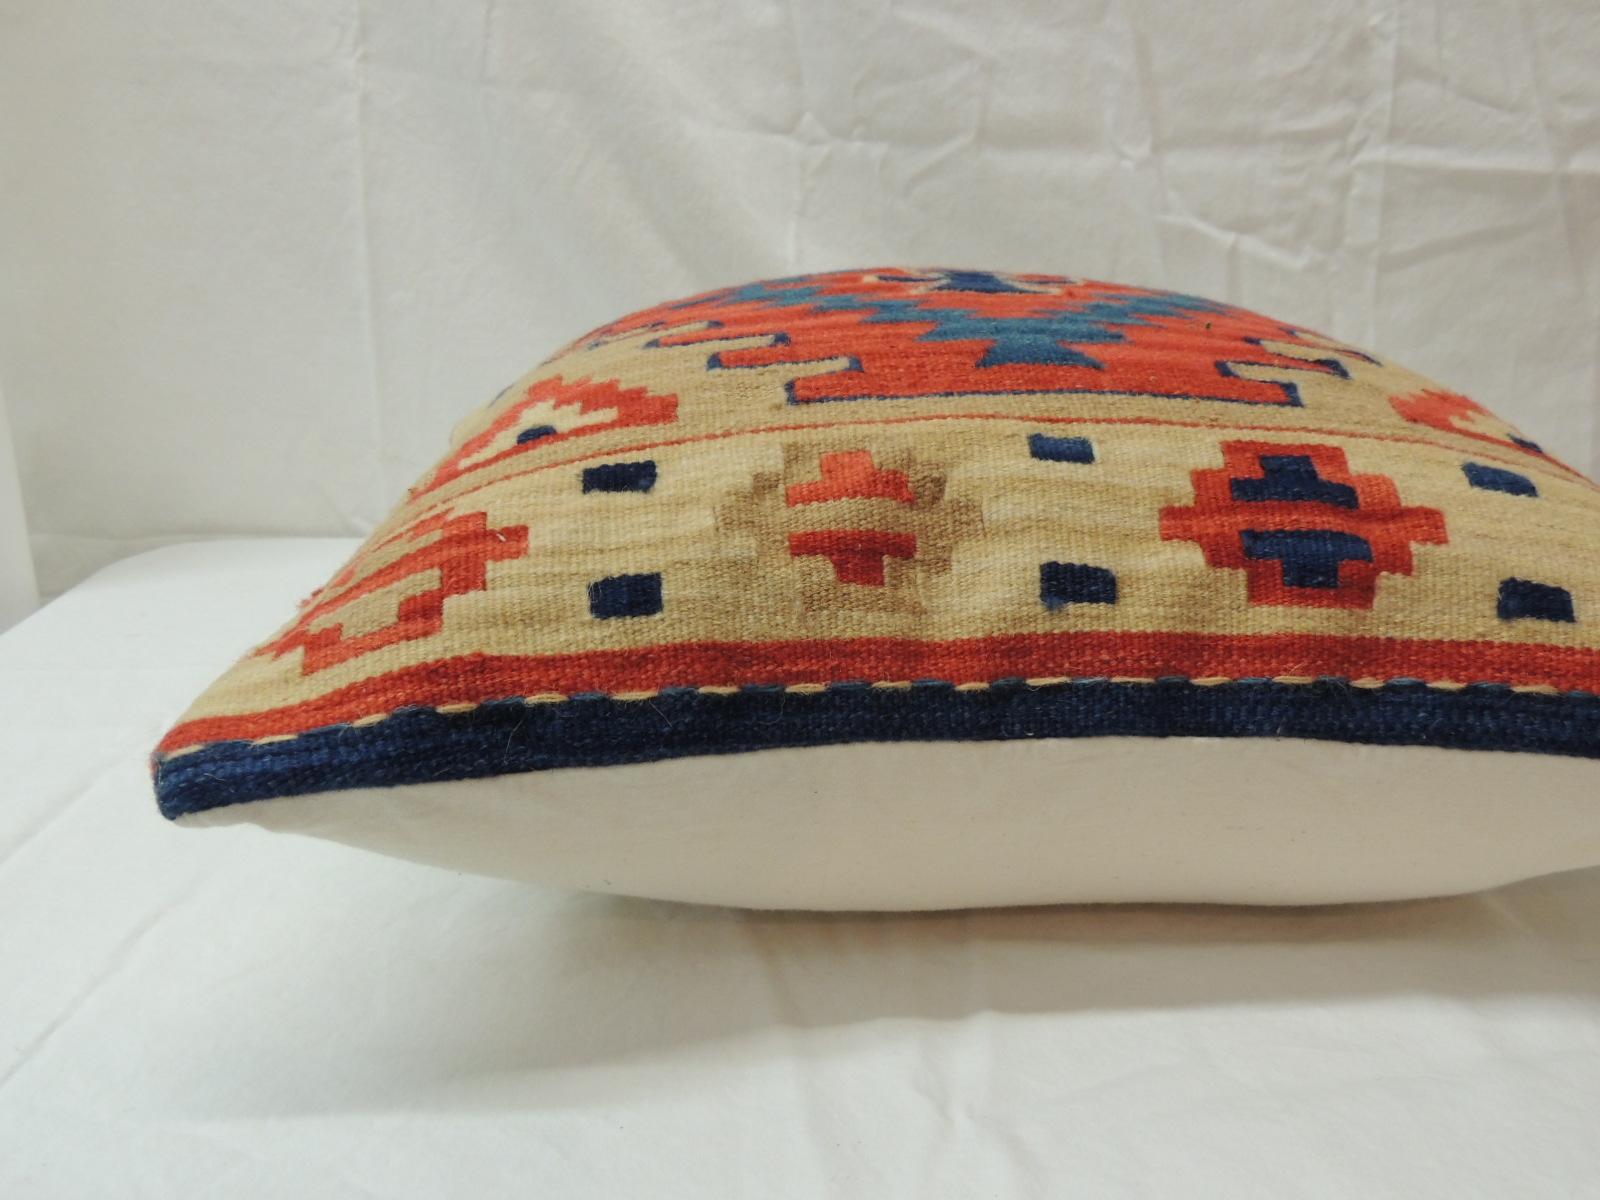 Hand-Crafted Vintage Orange and Blue Kilim Decorative Pillow